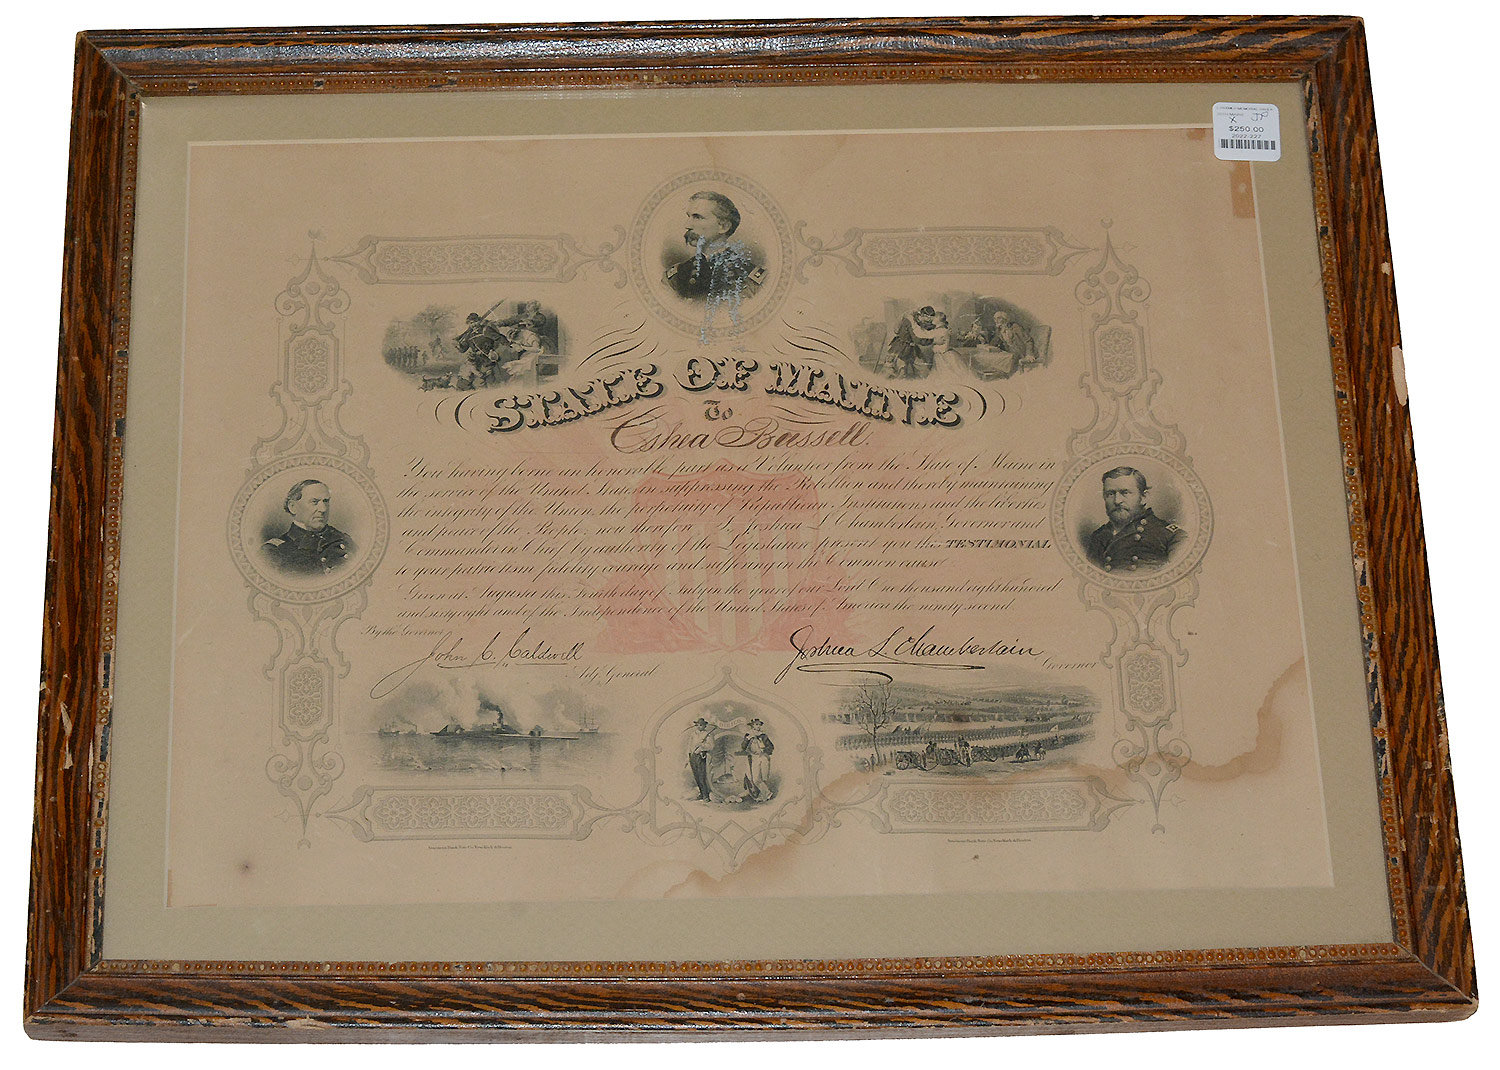 1868 MAINE CERTIFICATION OF PATRIOTISM FOR 20TH MAINE SOLDIER —SIGNED BY GOVERNOR JOSHUA CHAMBERLAIN